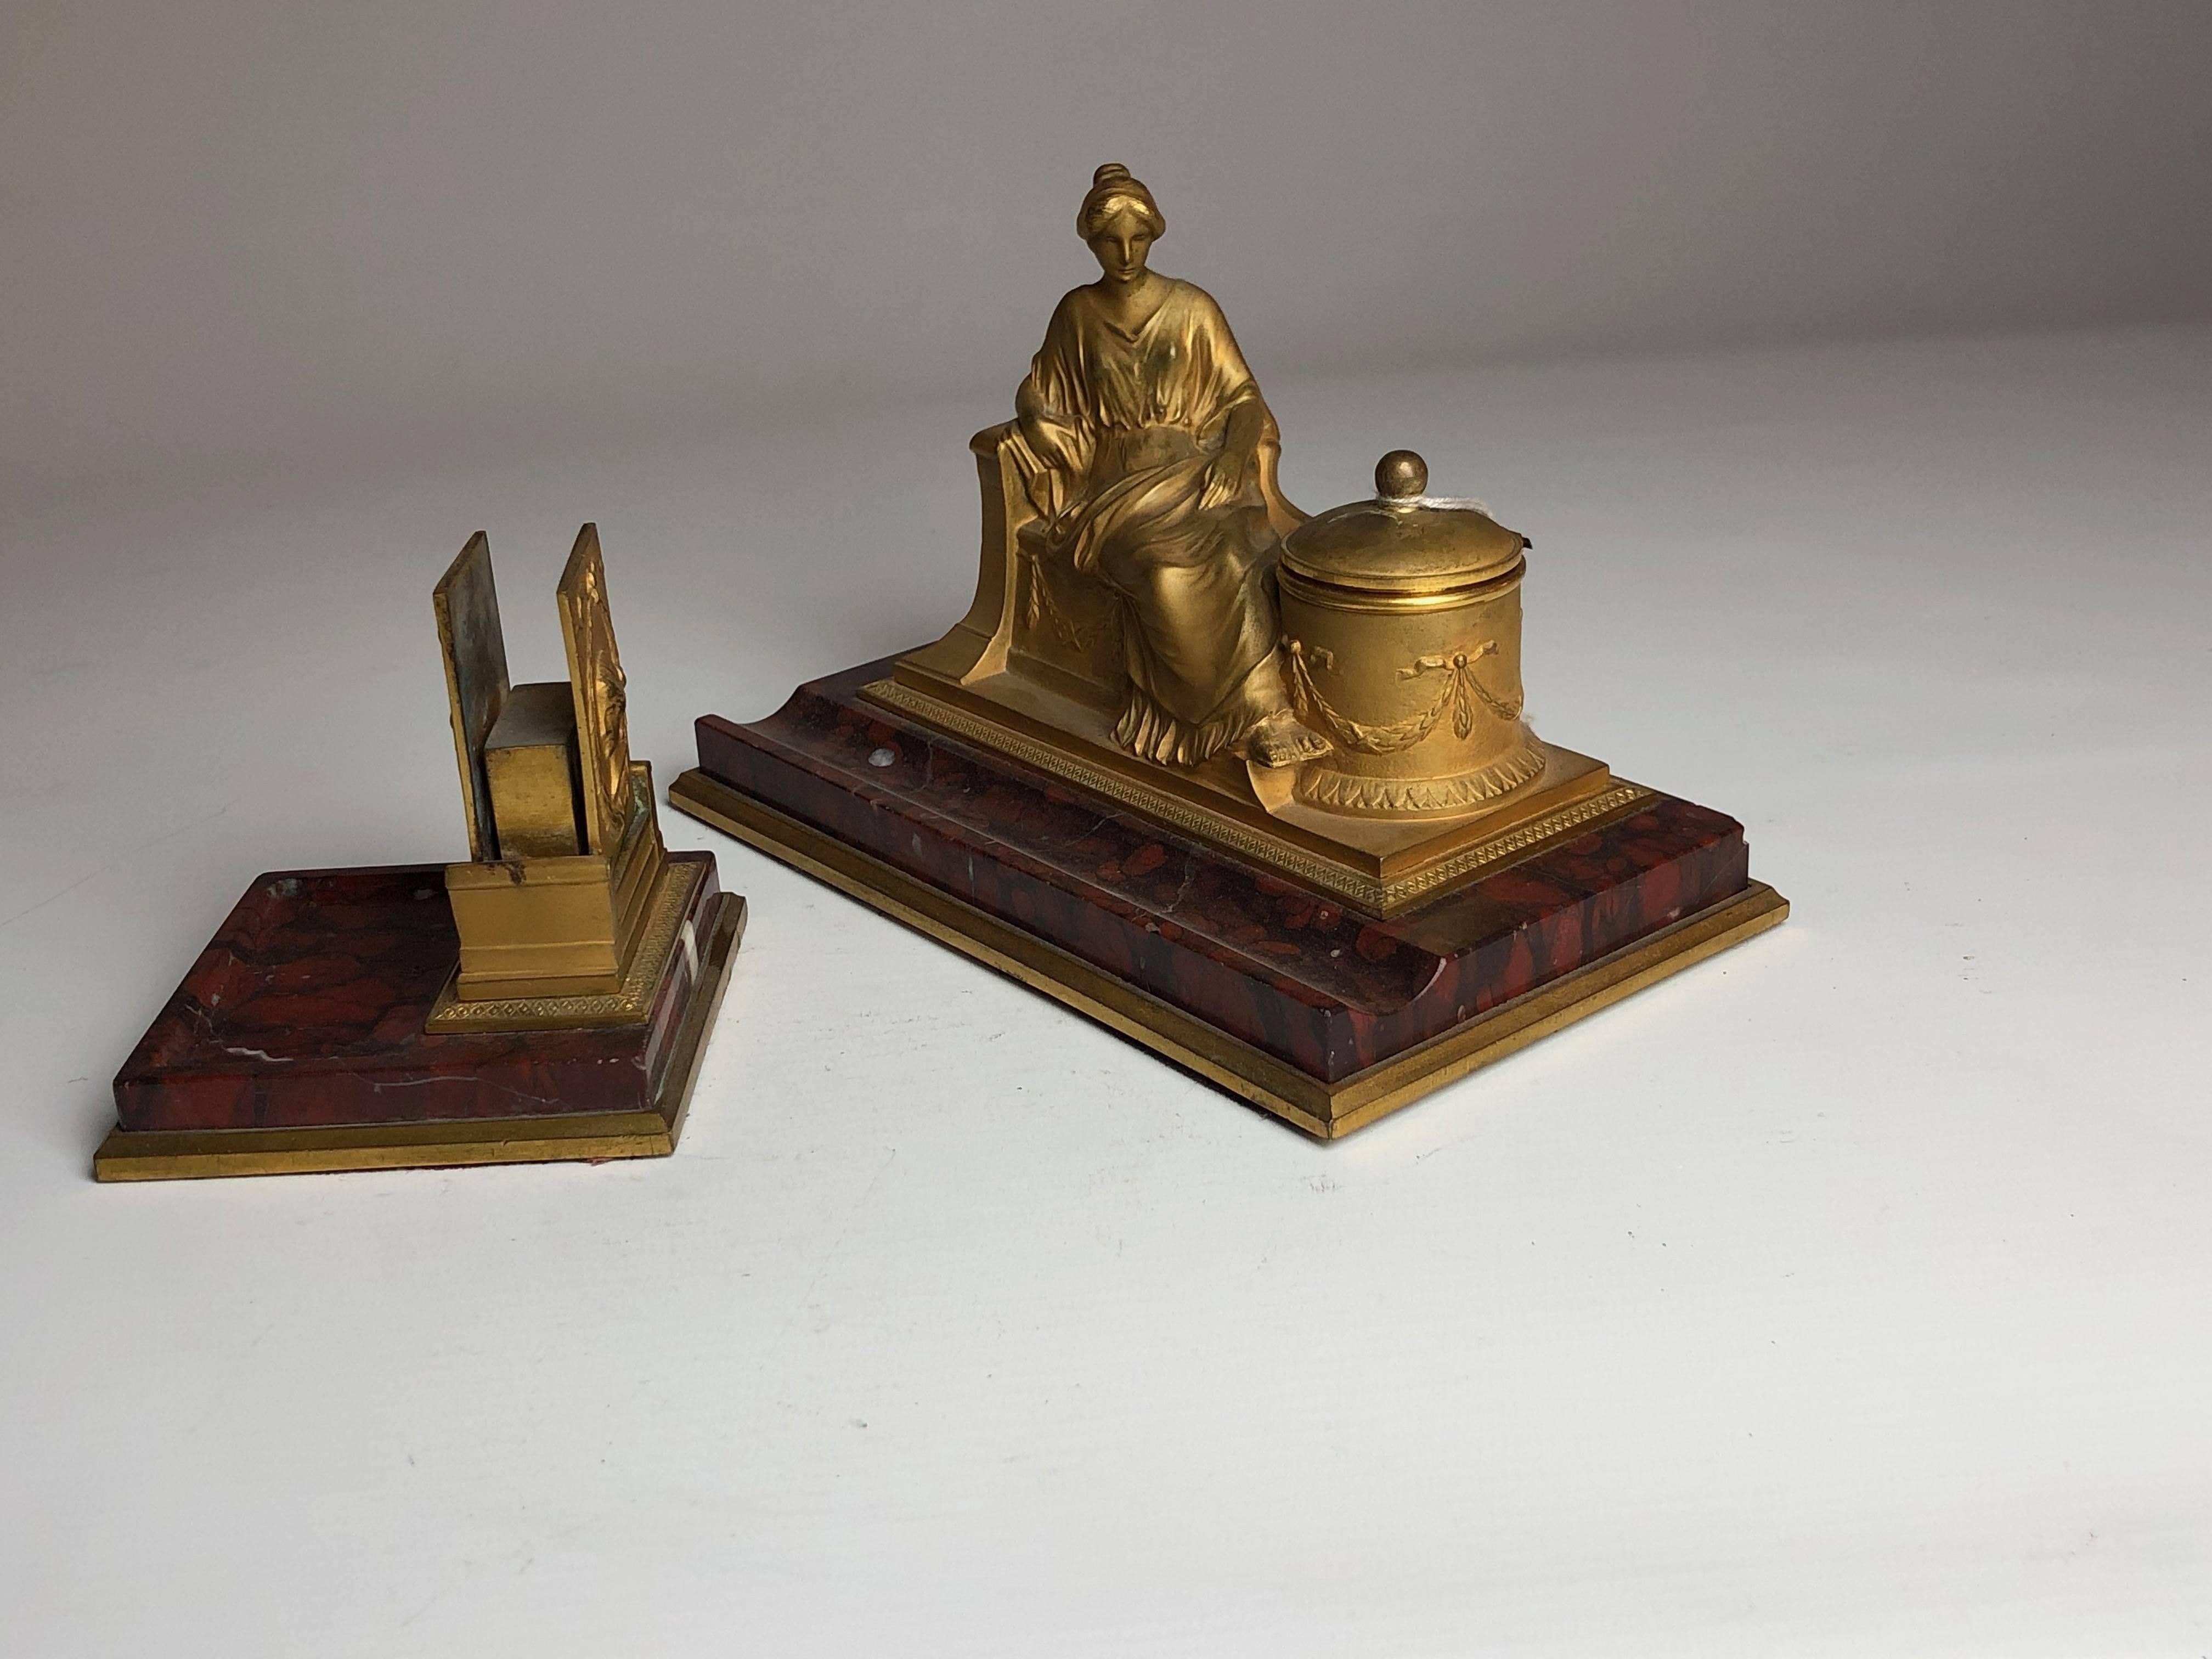 A lovely matching desk set comprising of a figural bronze inkwell with a matching match case and striker, both sat on reuge marble bases.
Signed on the rear of the inkwell 